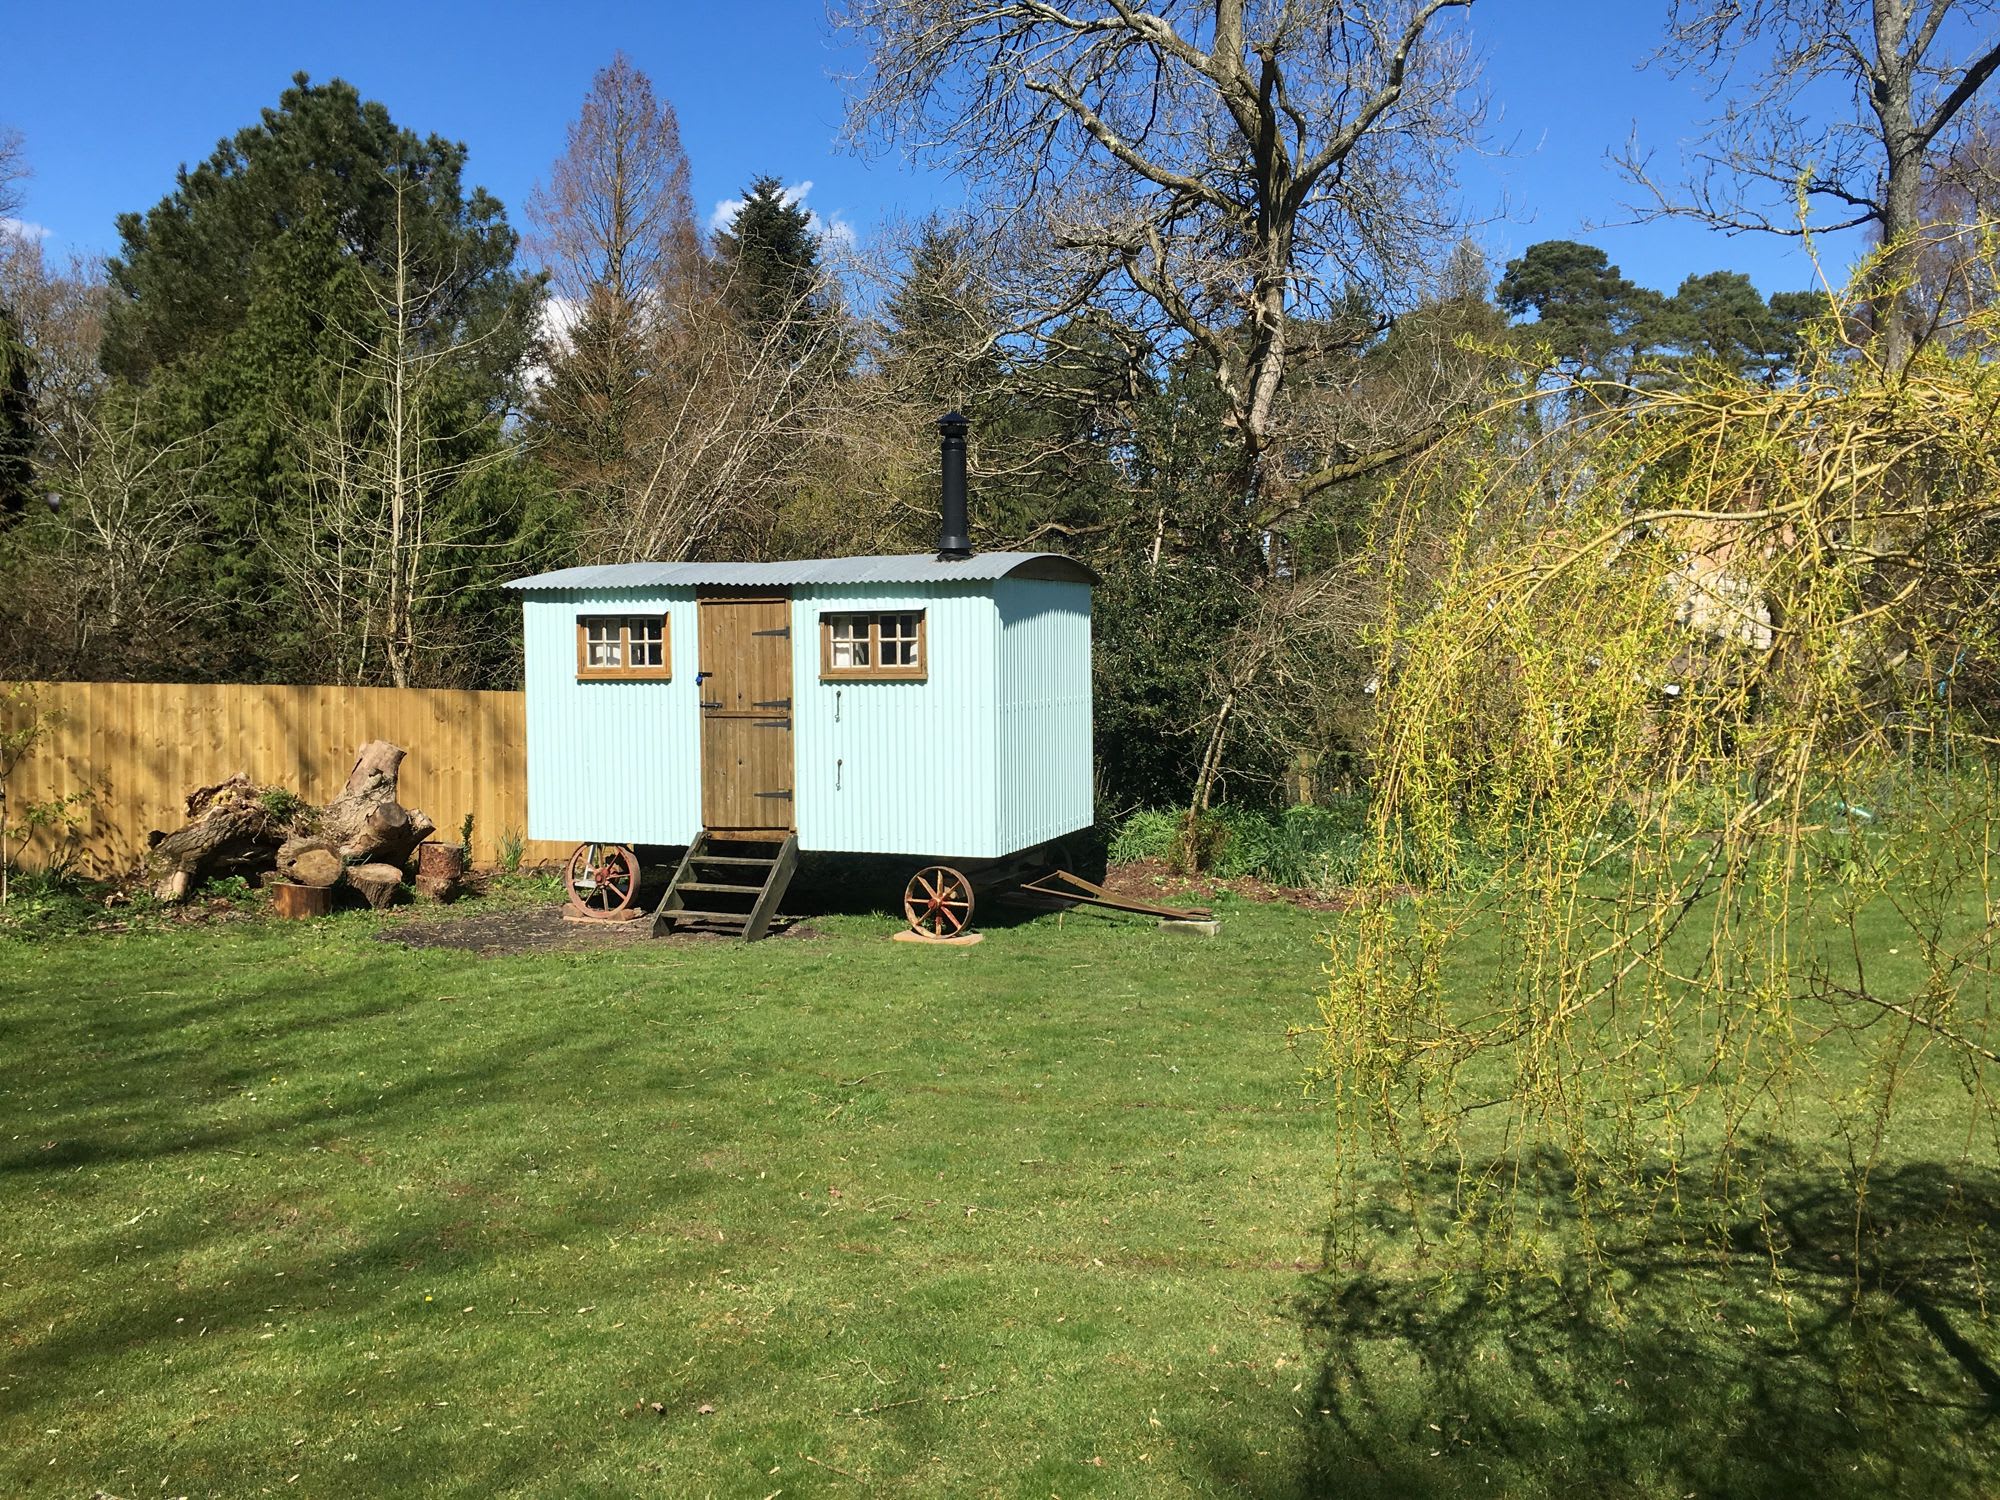 A single shepherd's hut ideal for couples or families of four, located near Ringwood on the edge of the New Forest.